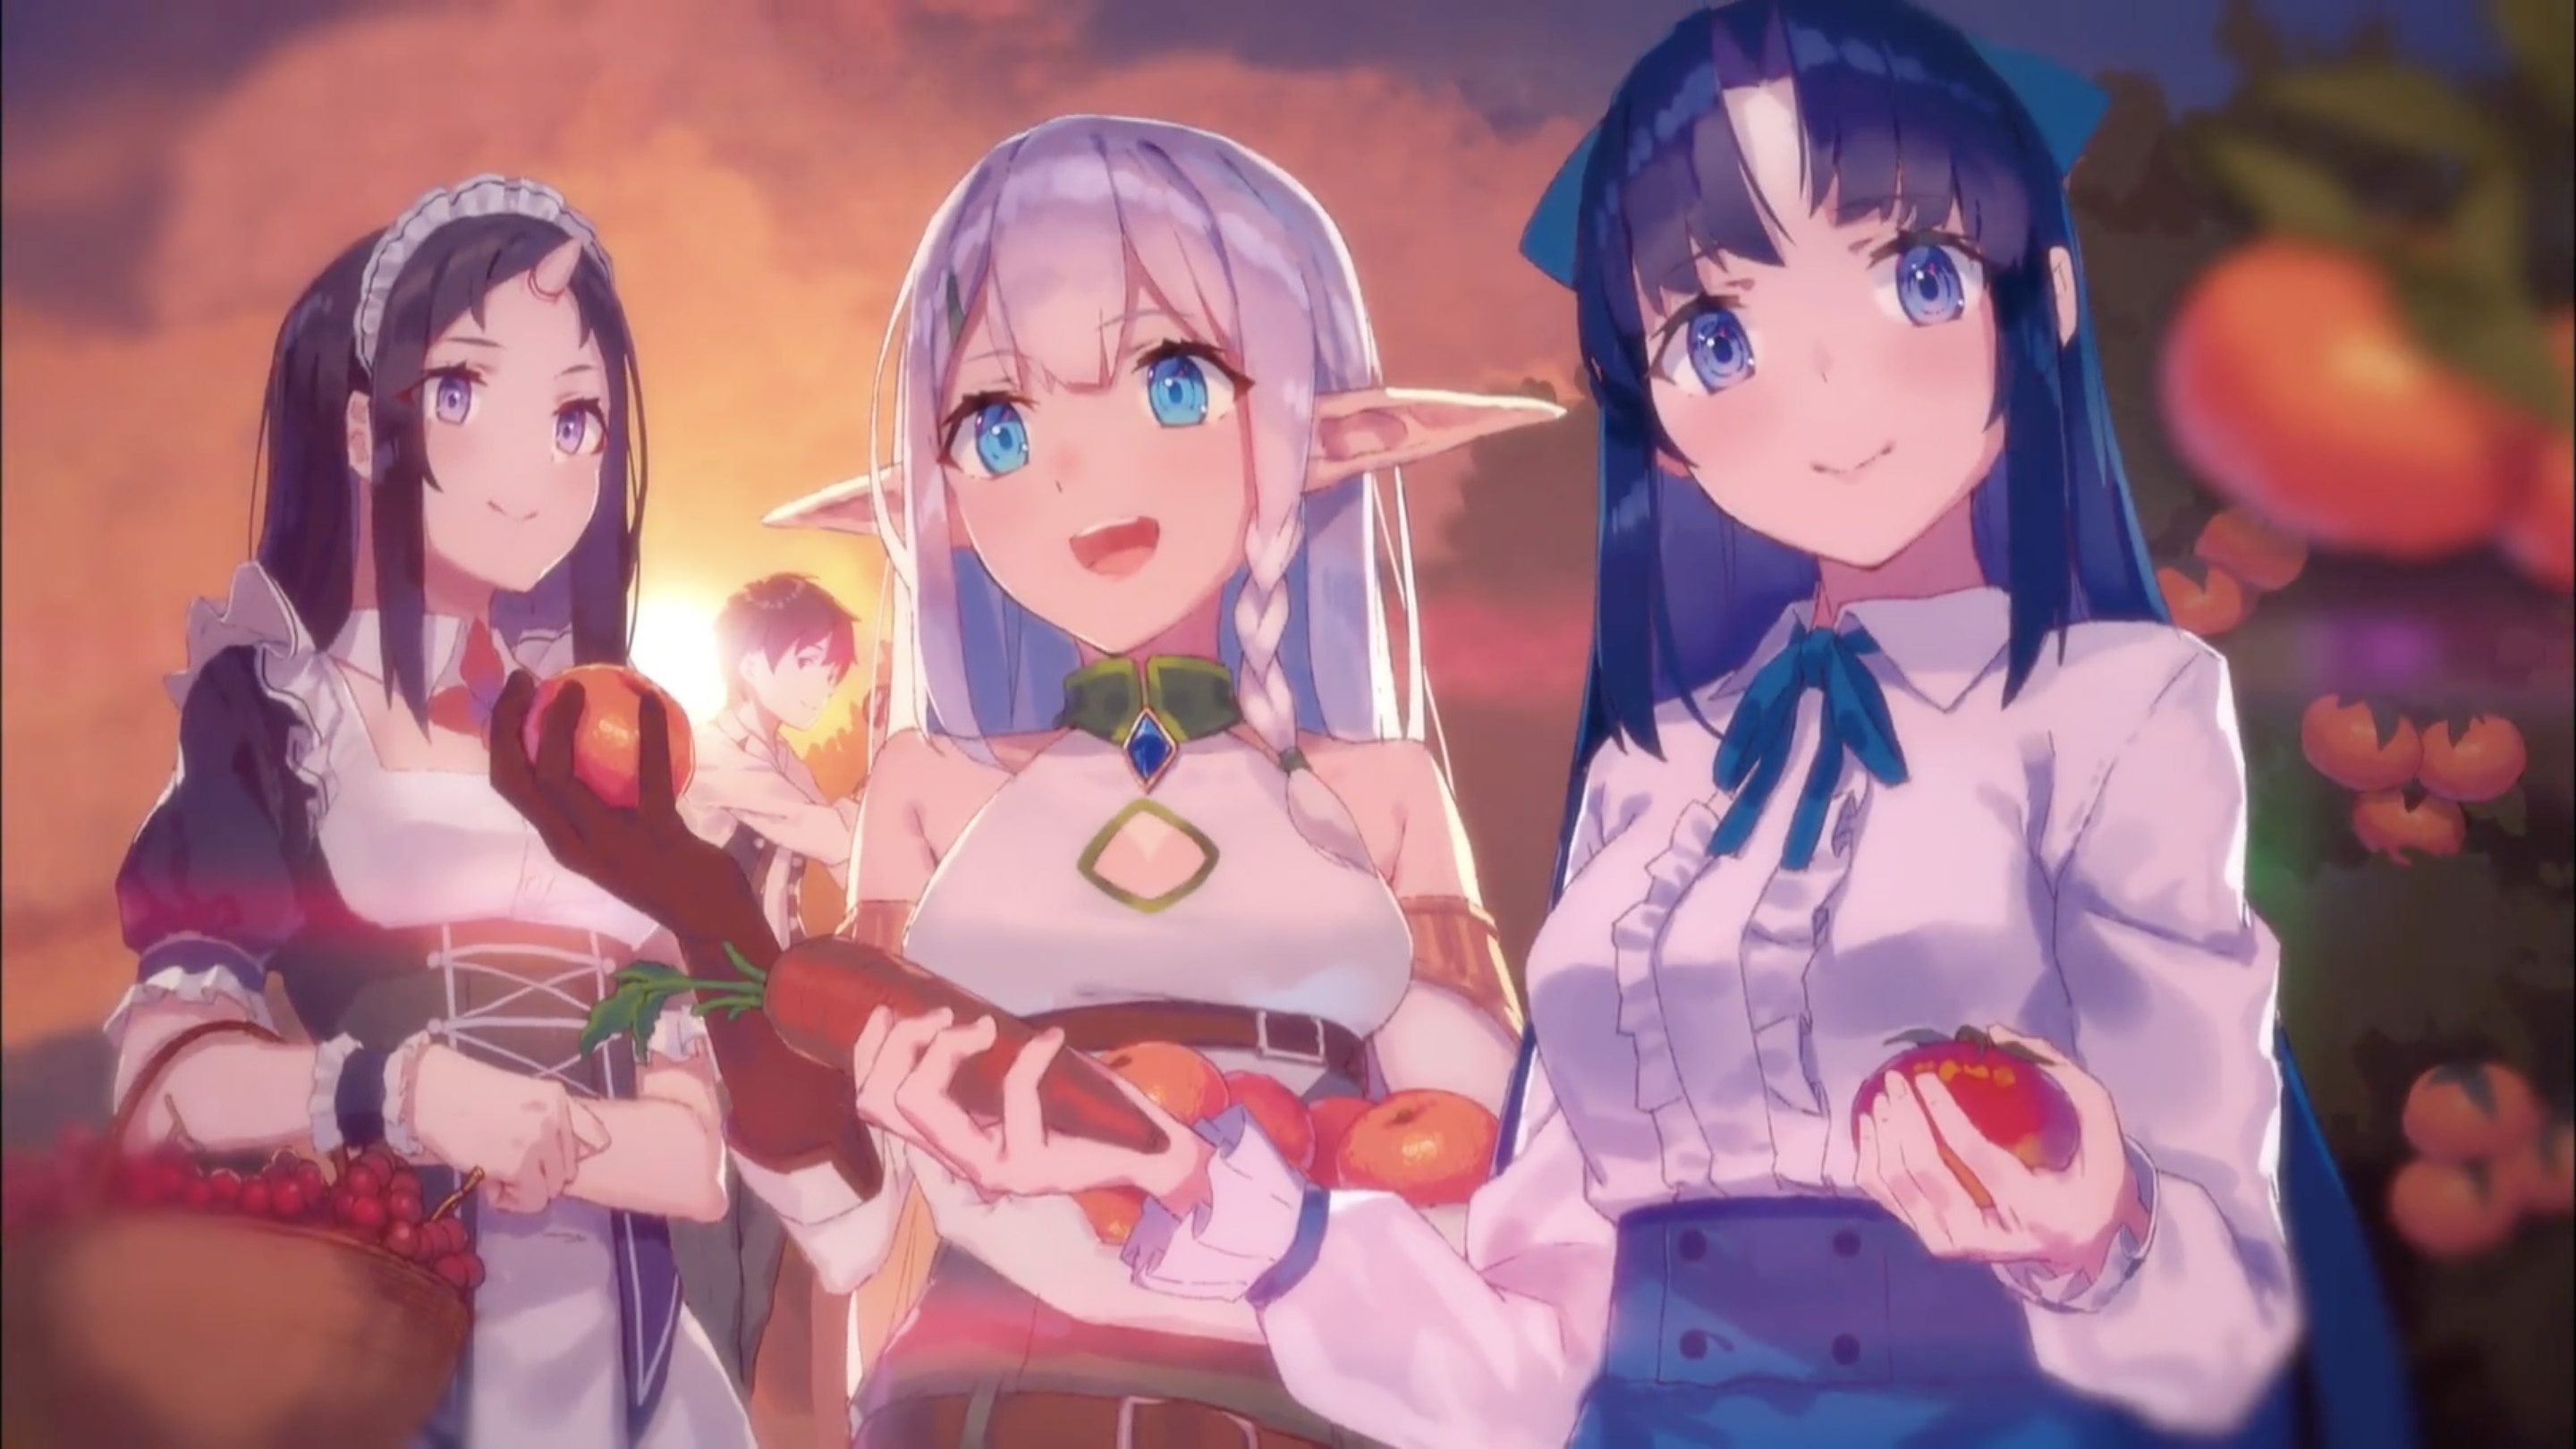 Farming Life in Another World TV Anime Sets January 2023 Broadcast with Visual, Staff Reveal